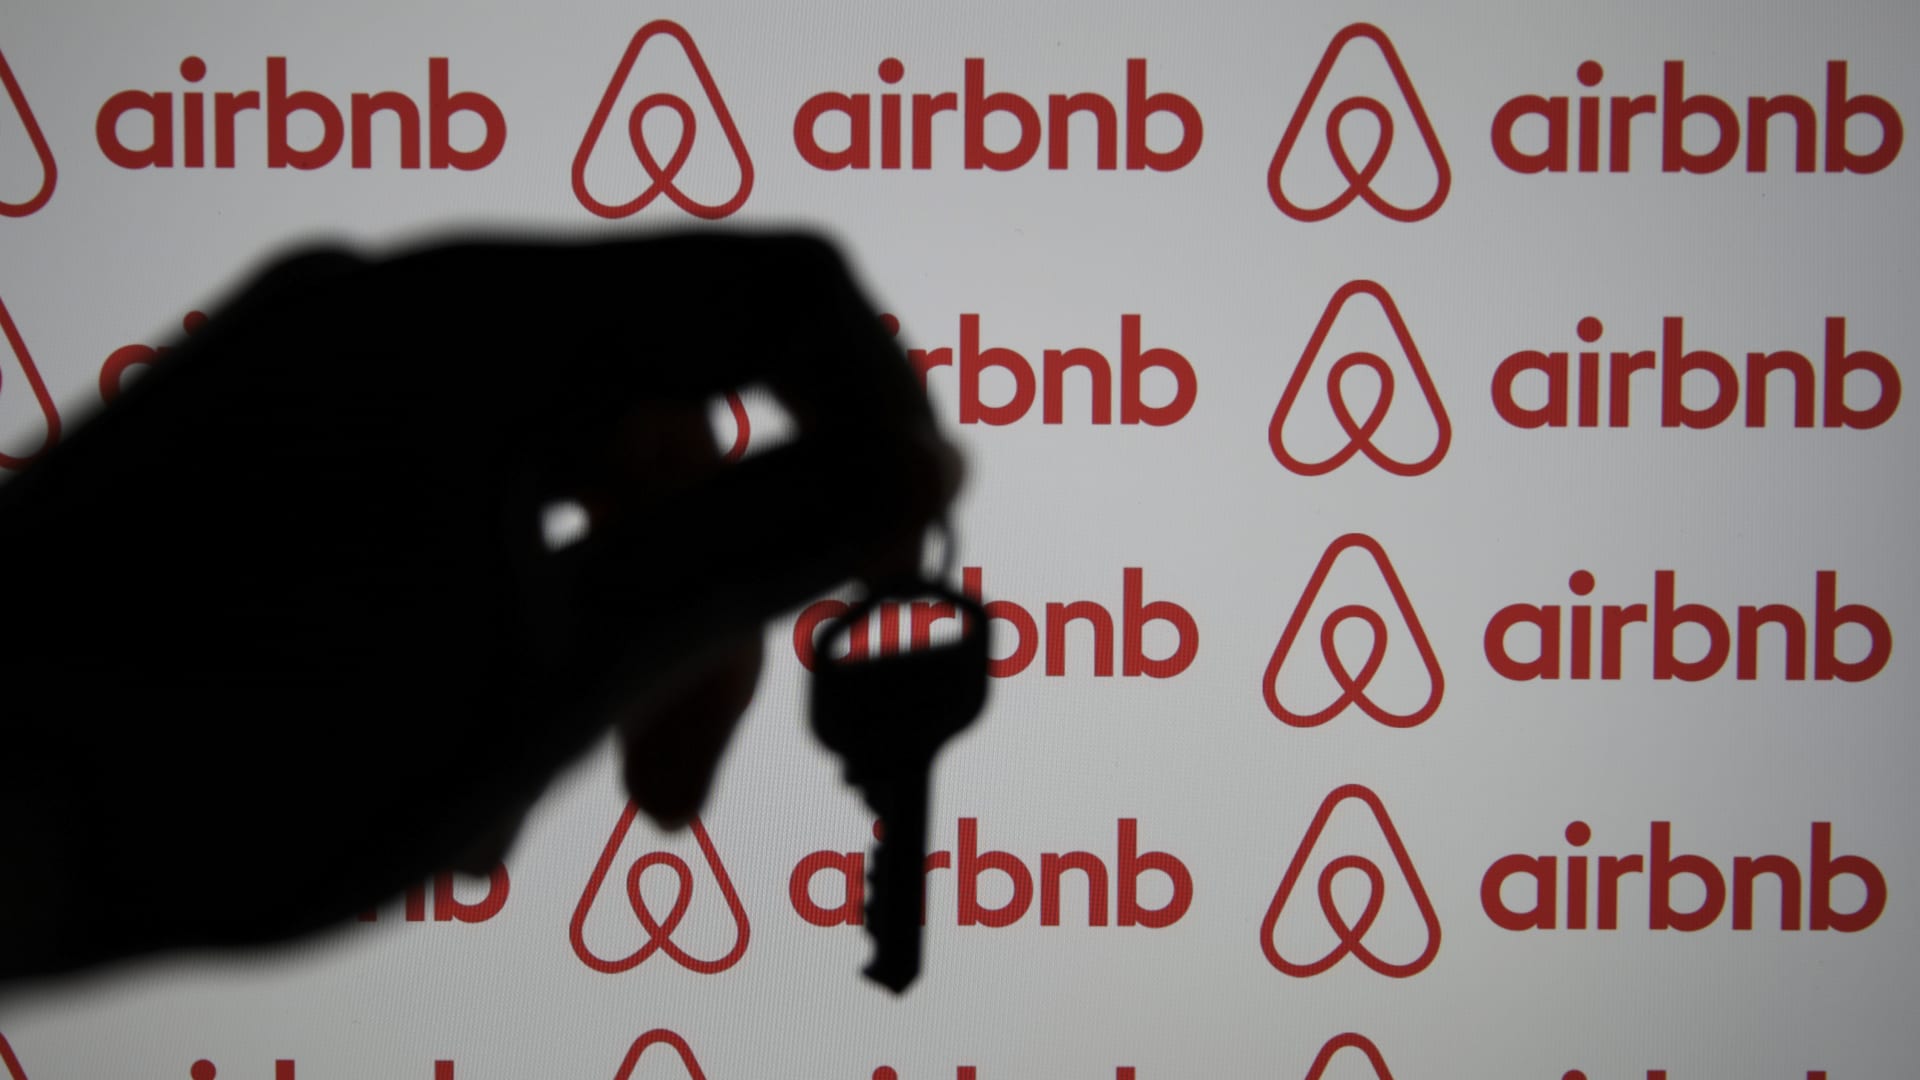 Airbnb’s new chief small business officer shares his top priorities for hosts and travelers